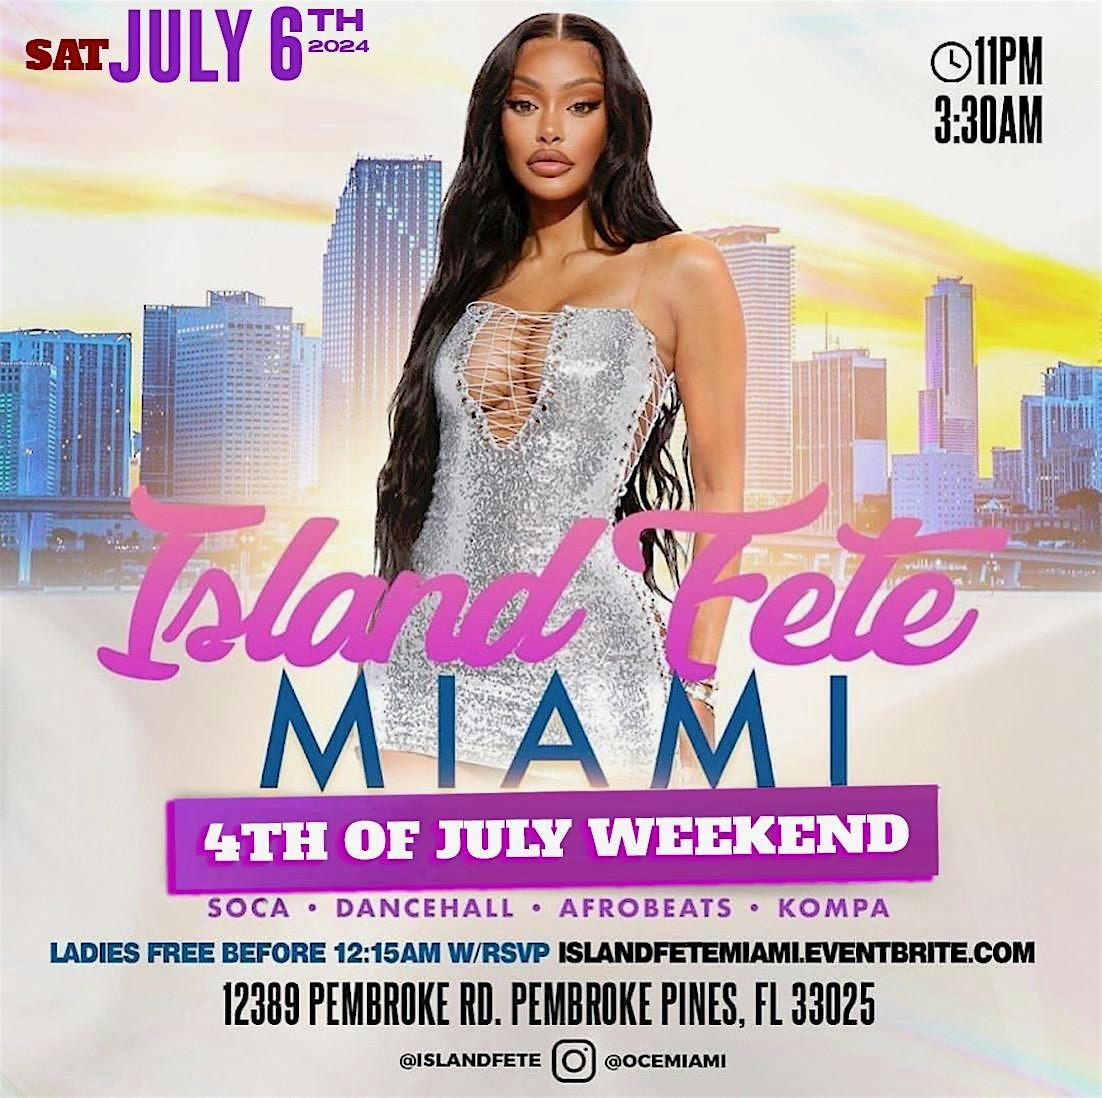 Island Fete Miami - 4th of July Weekend